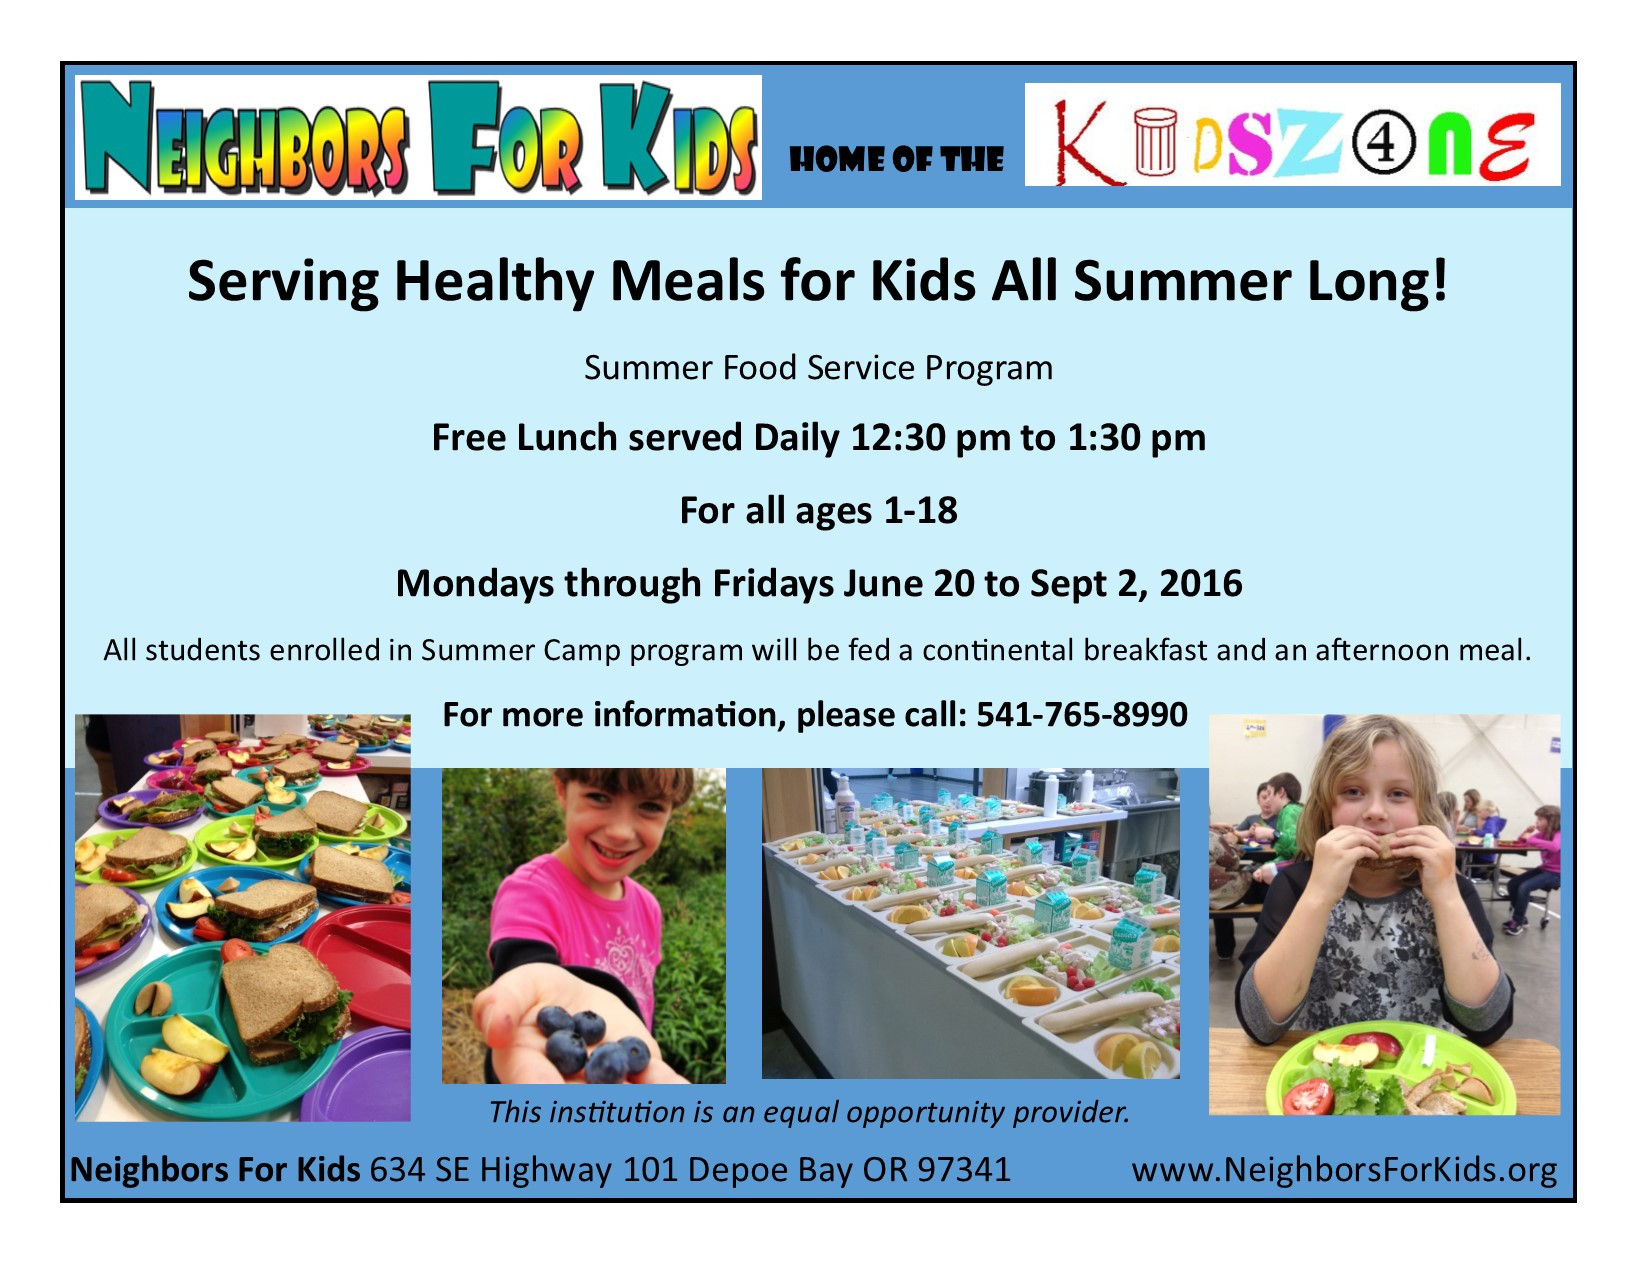 Free Summer Food Program
 Free Summer Lunch for Kids at the Kids Zone